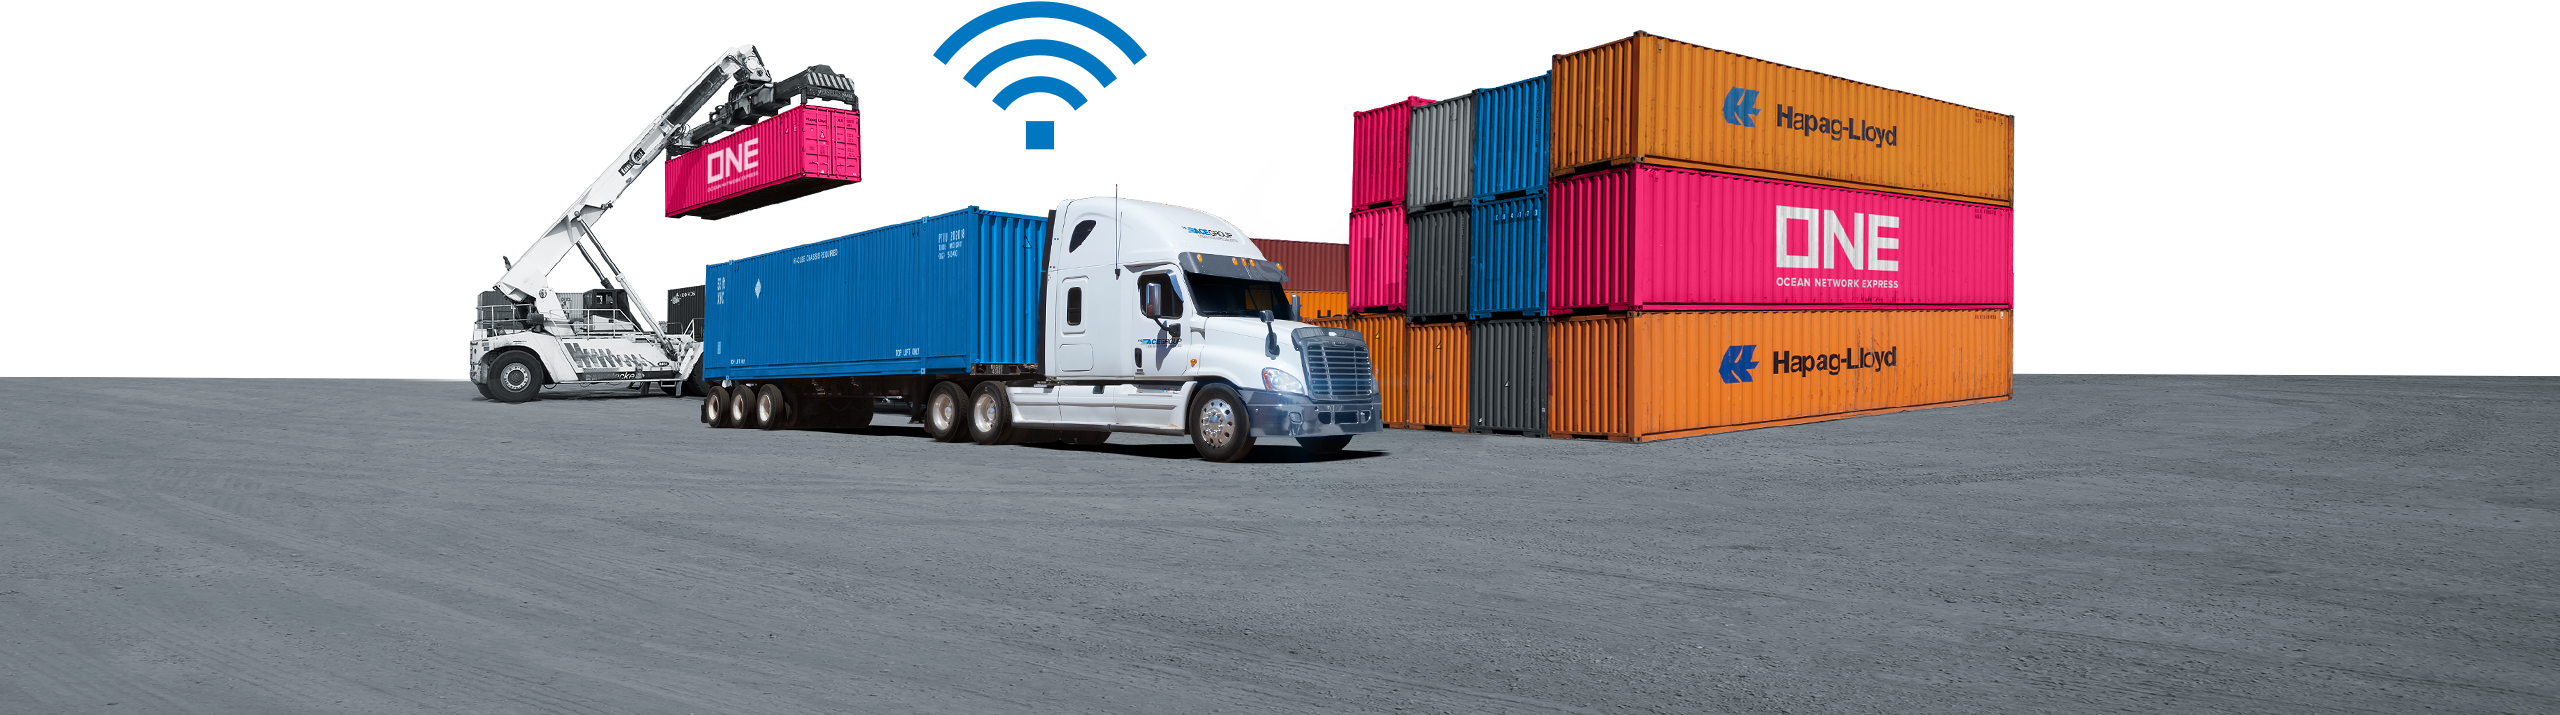 Hyster container lifter and transport truck in a container storage yard with a WIFI signal icon above the truck